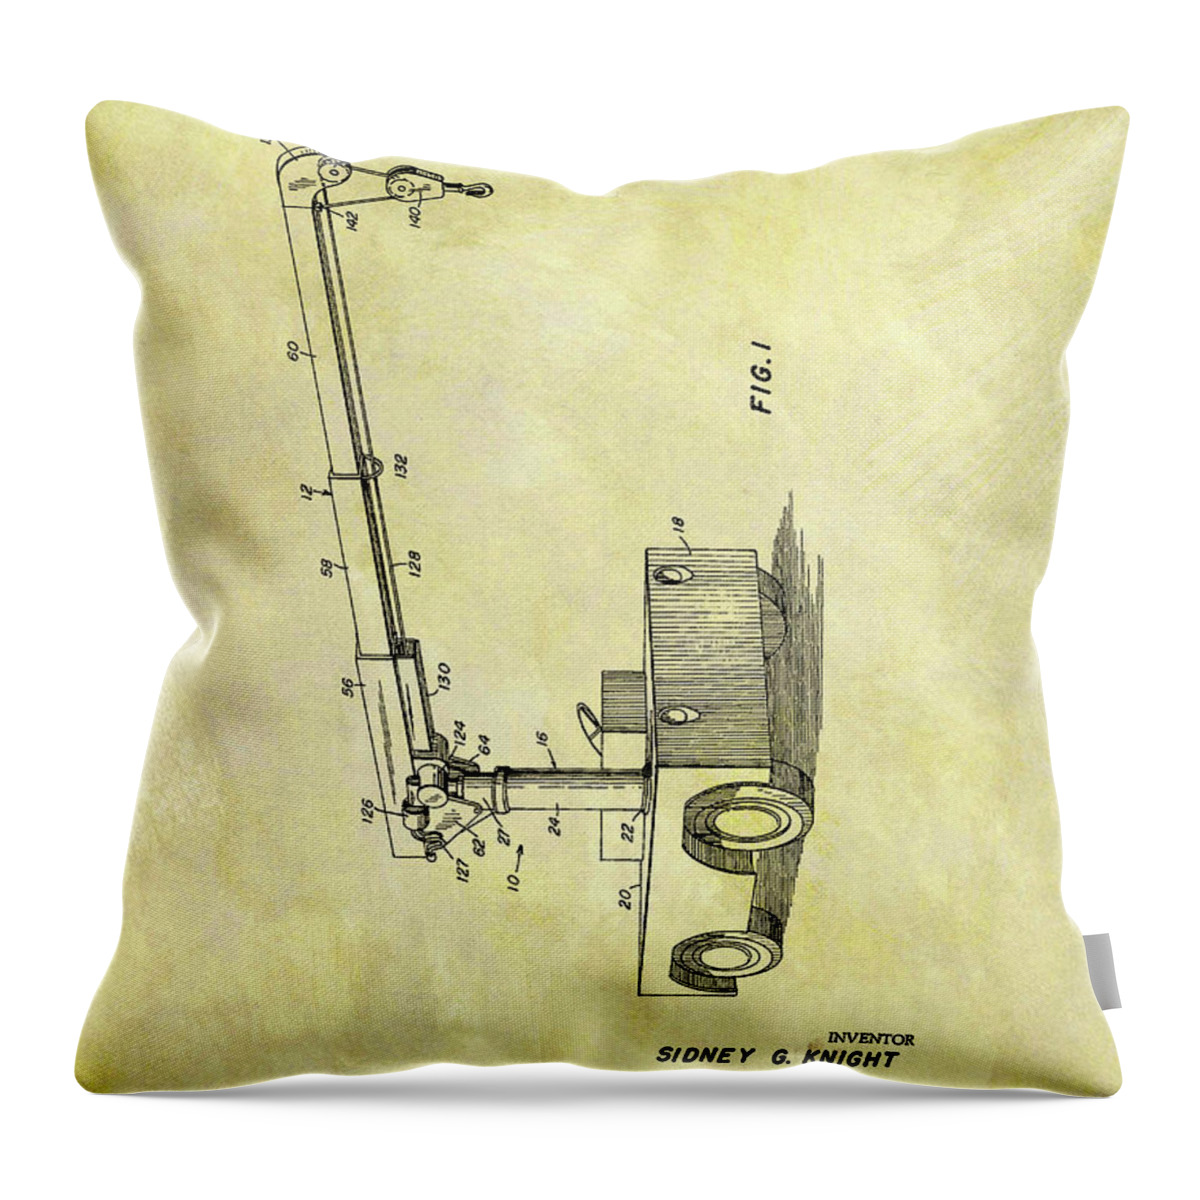 1963 Mobile Crane Patent Throw Pillow featuring the drawing 1963 Mobile Crane Patent by Dan Sproul